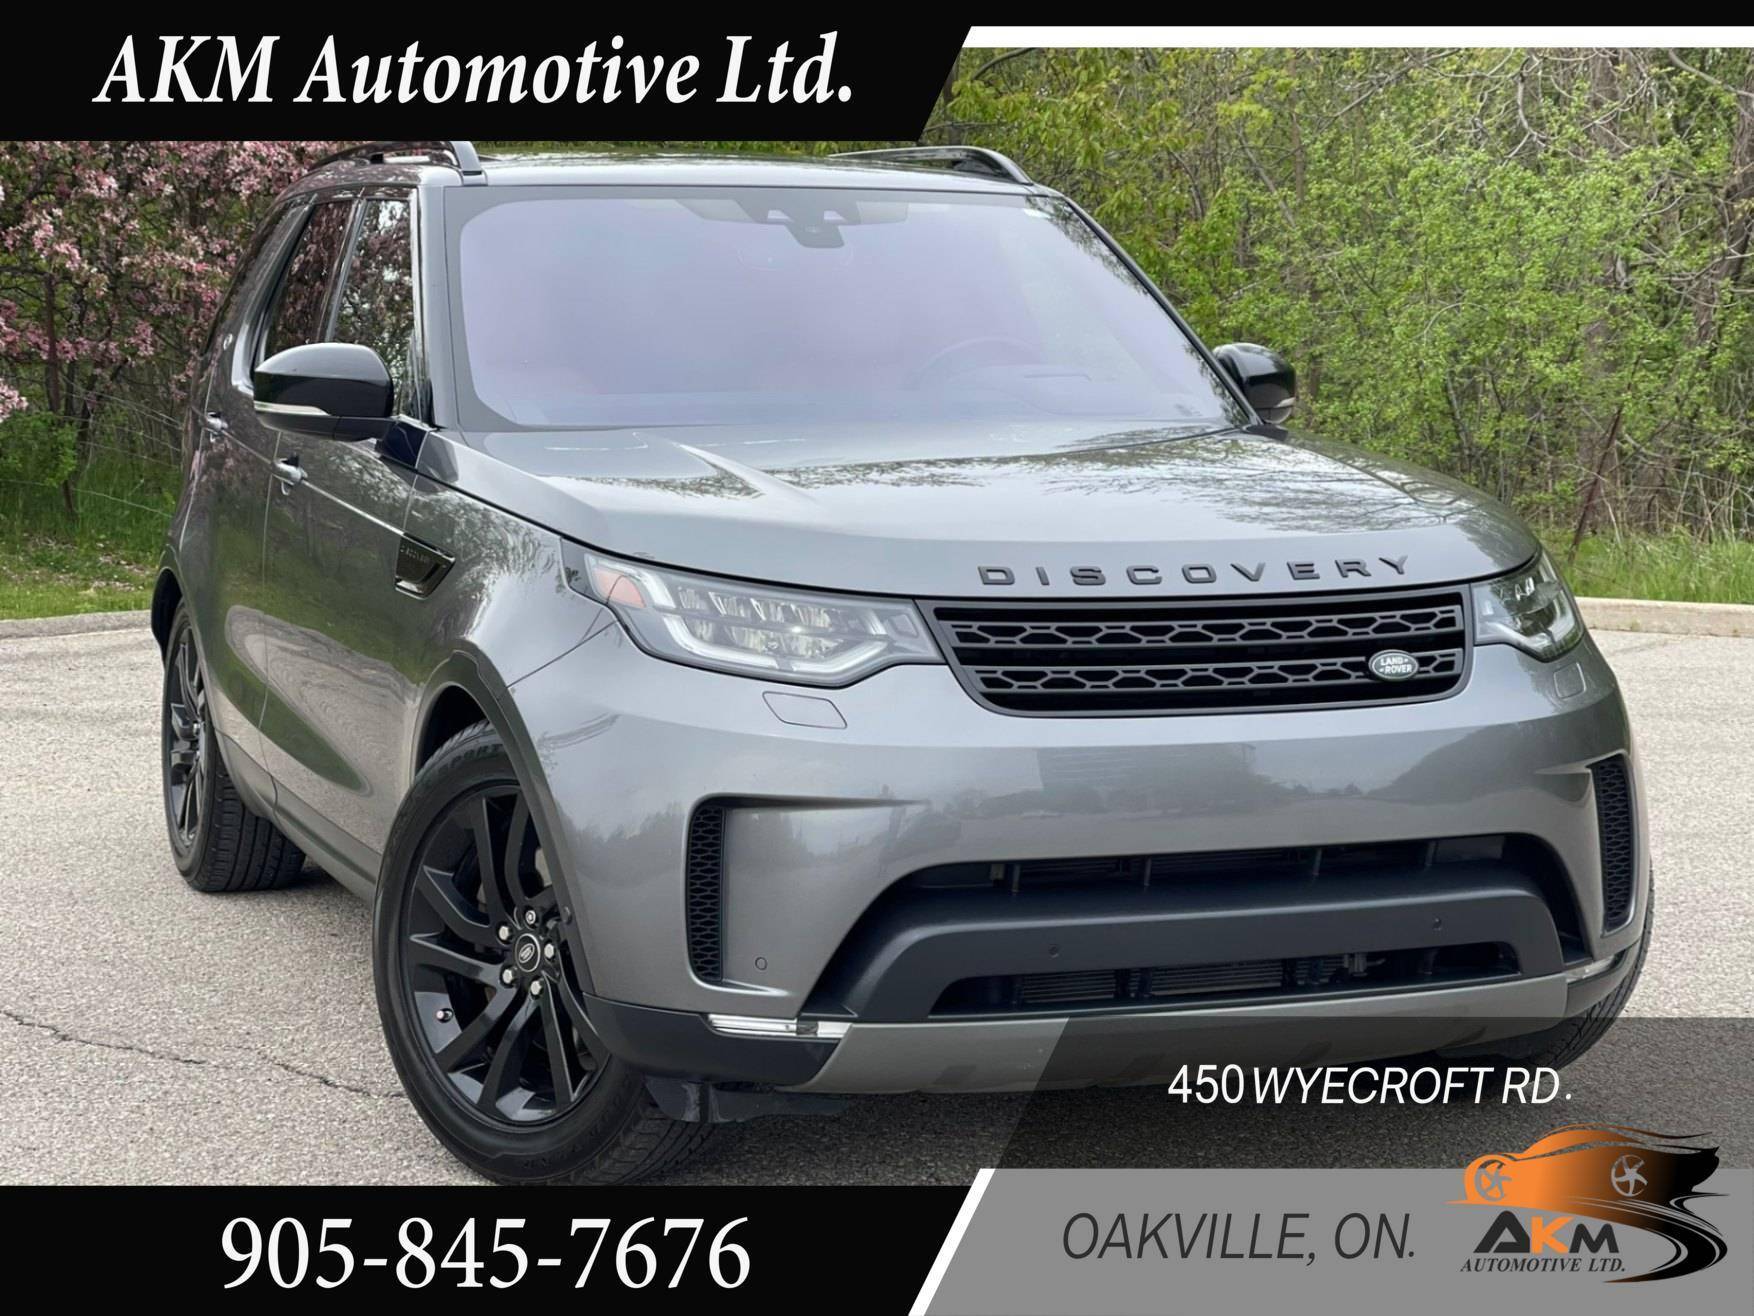 2018 Land Rover Discovery HSE Td6 4WD, 7 Seats, Diesel, Certified